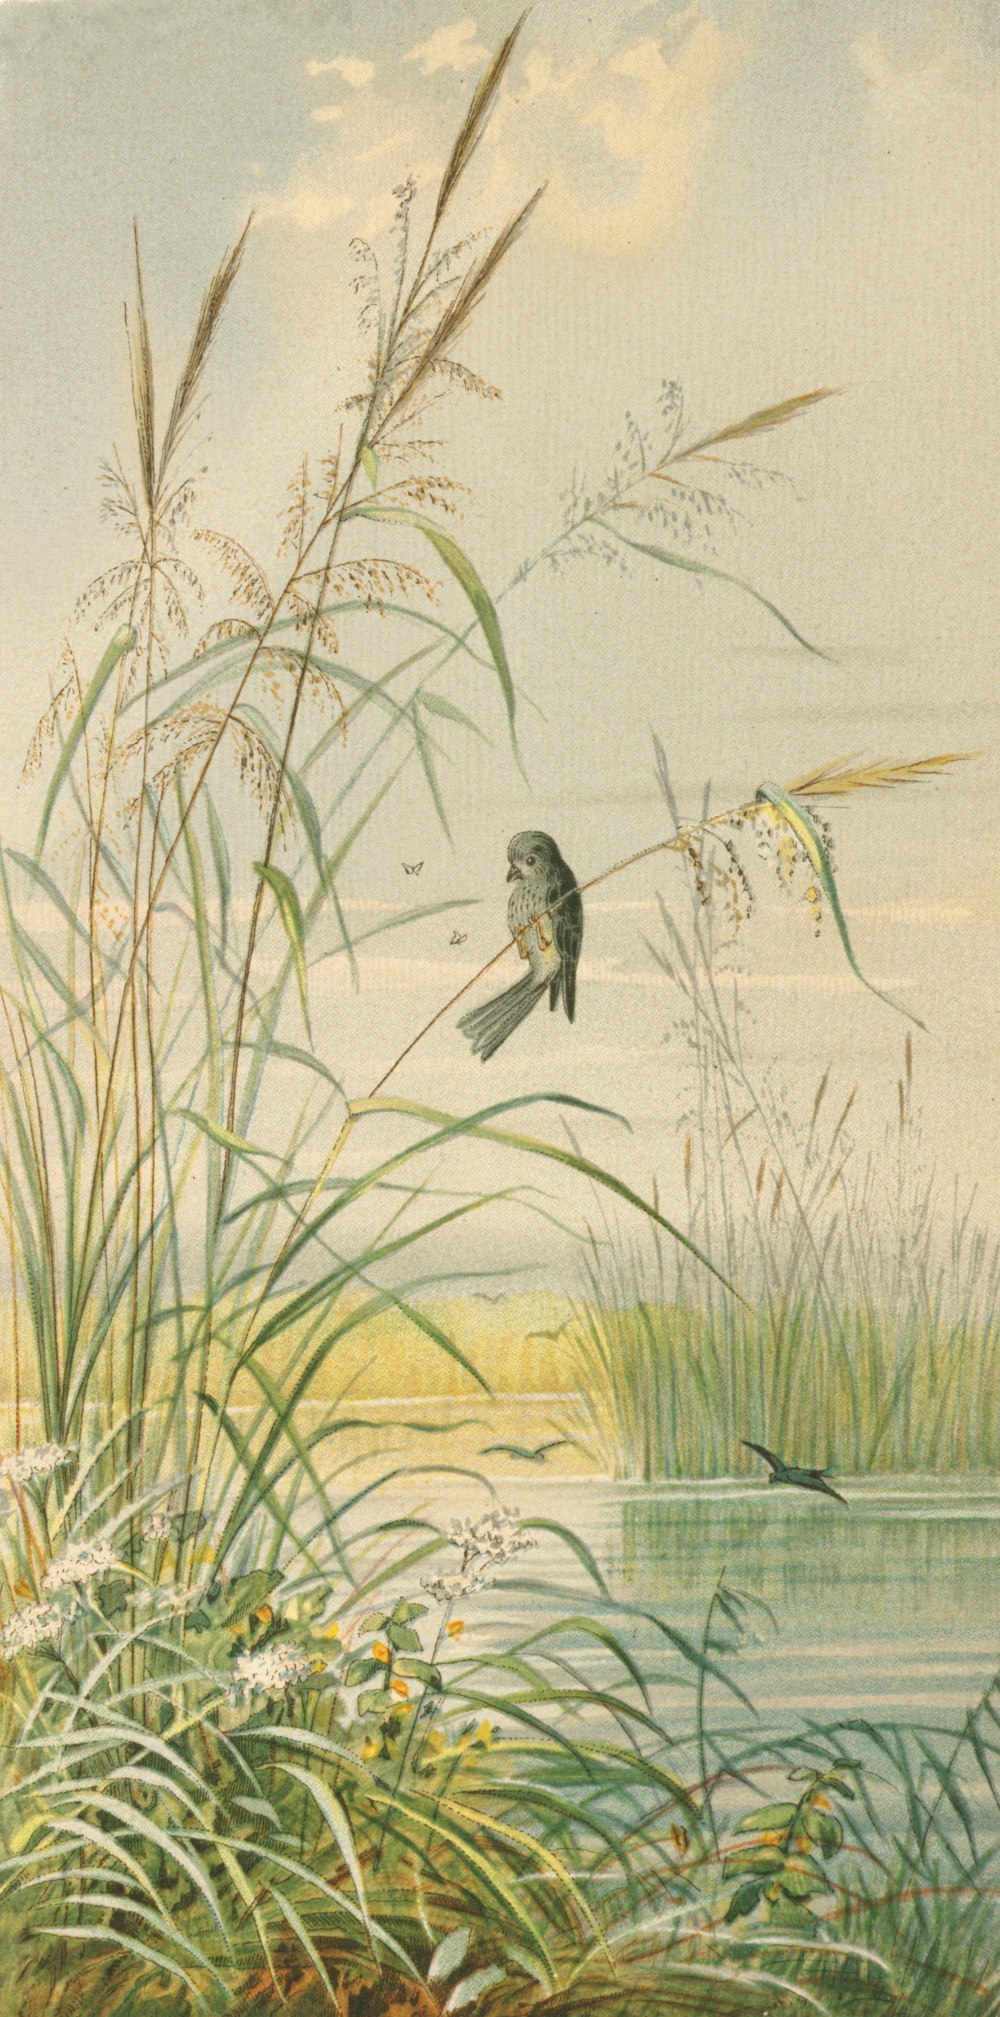 a painting of a bird flying over a body of water